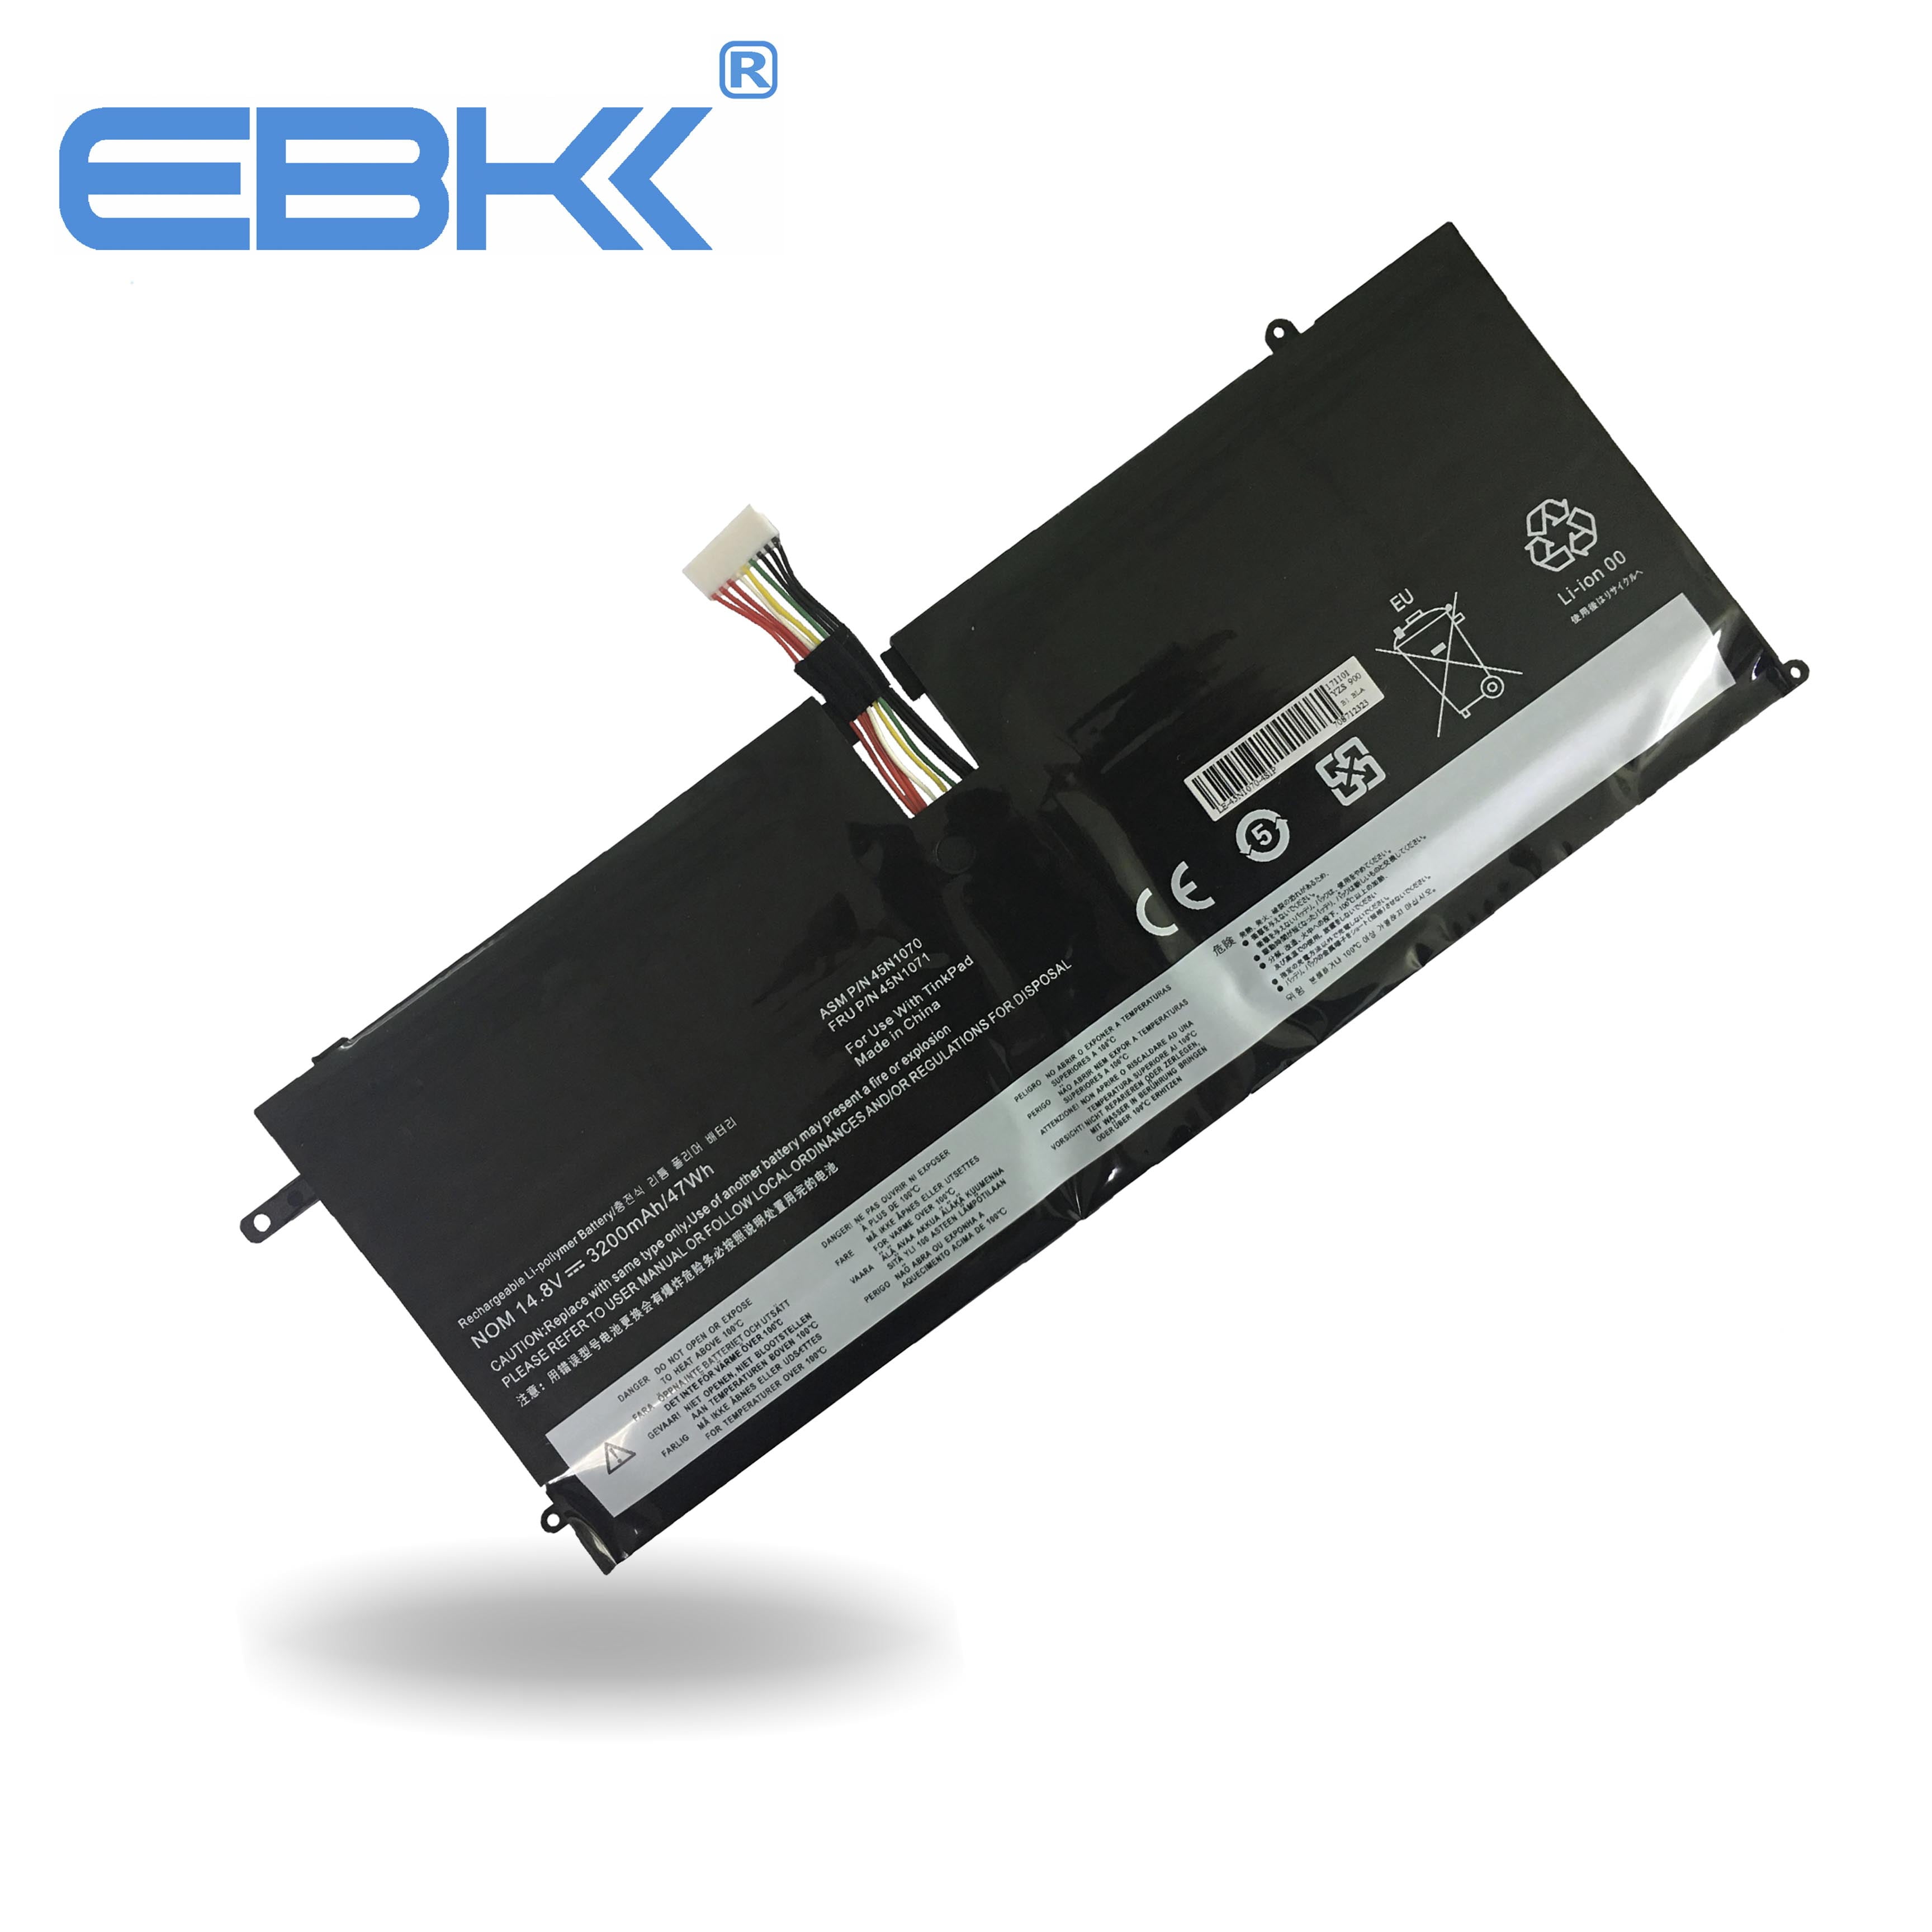  47Wh 45N1070 Laptop Battery Replacement for Lenovo ThinkPad X1 Carbon  3444 3448 3460 3462 3463 X1C 3460-CLG Series 4ICP4/51/95 